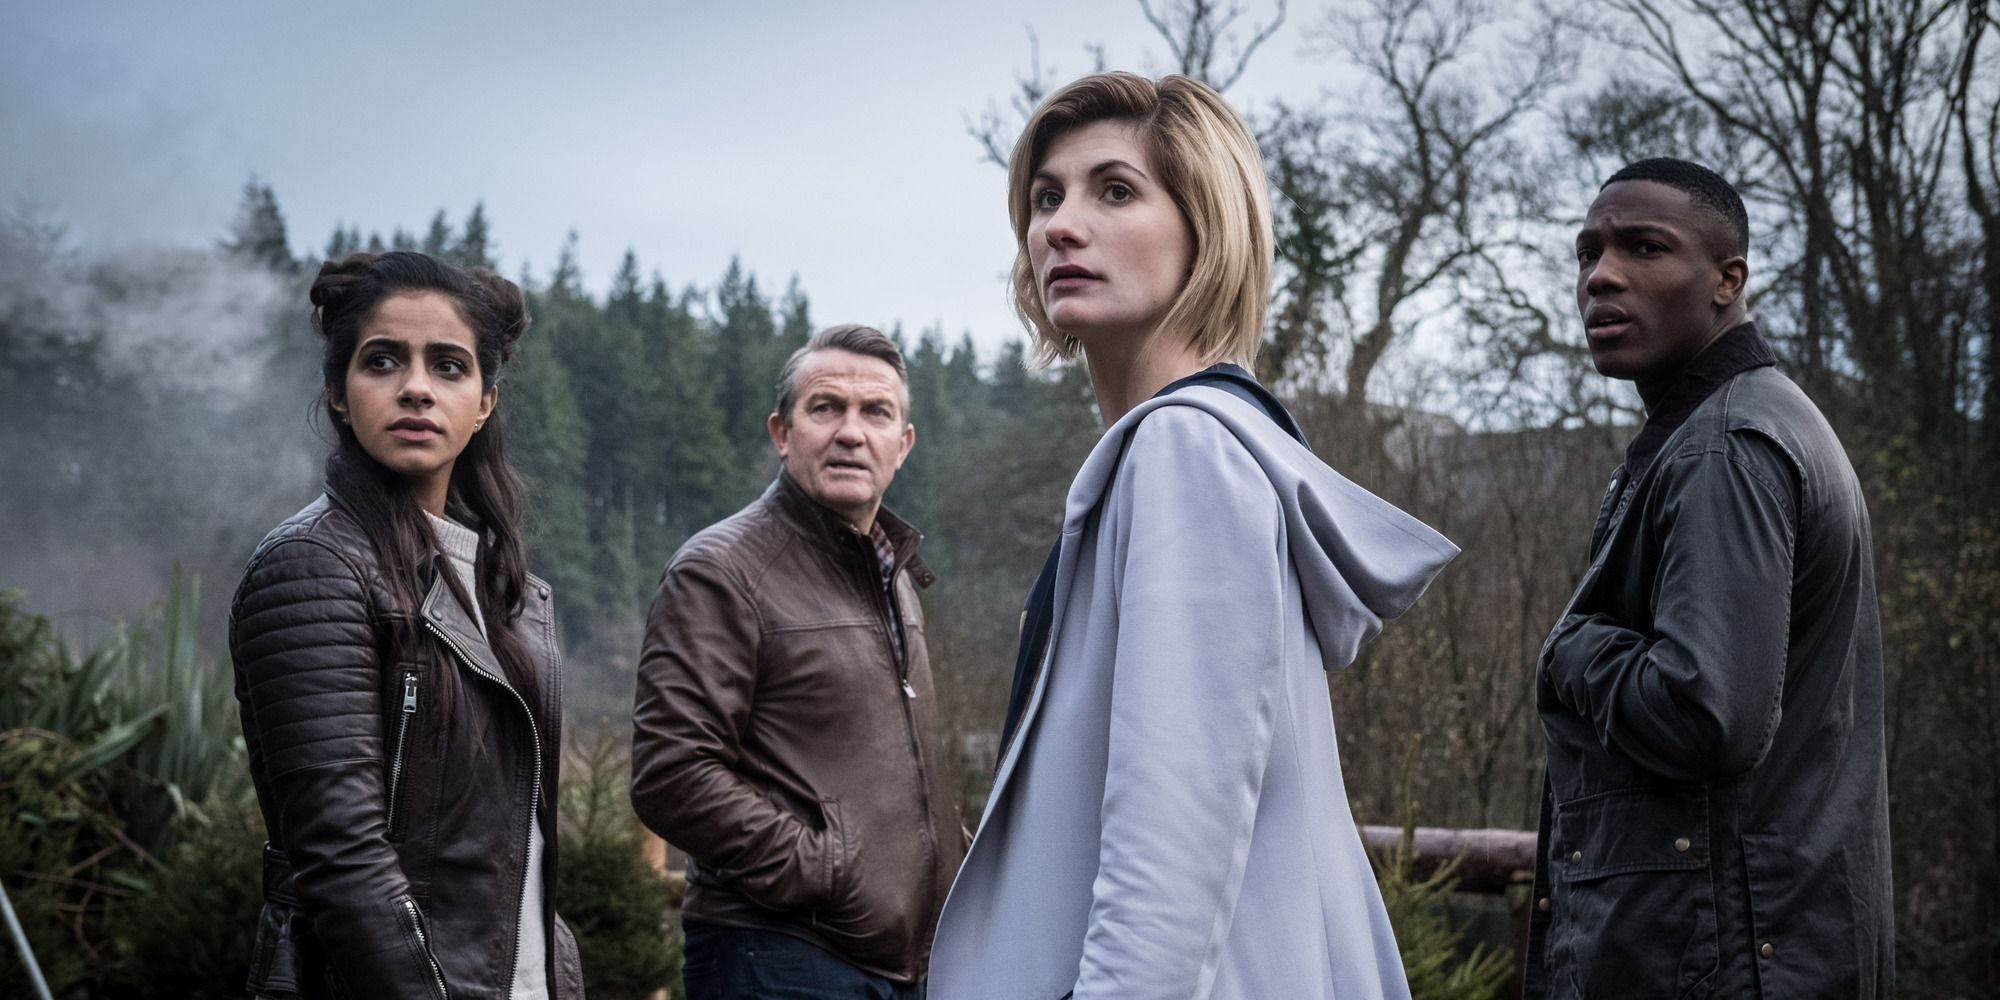 Official image of the Doctor Who Series 11 main characters.